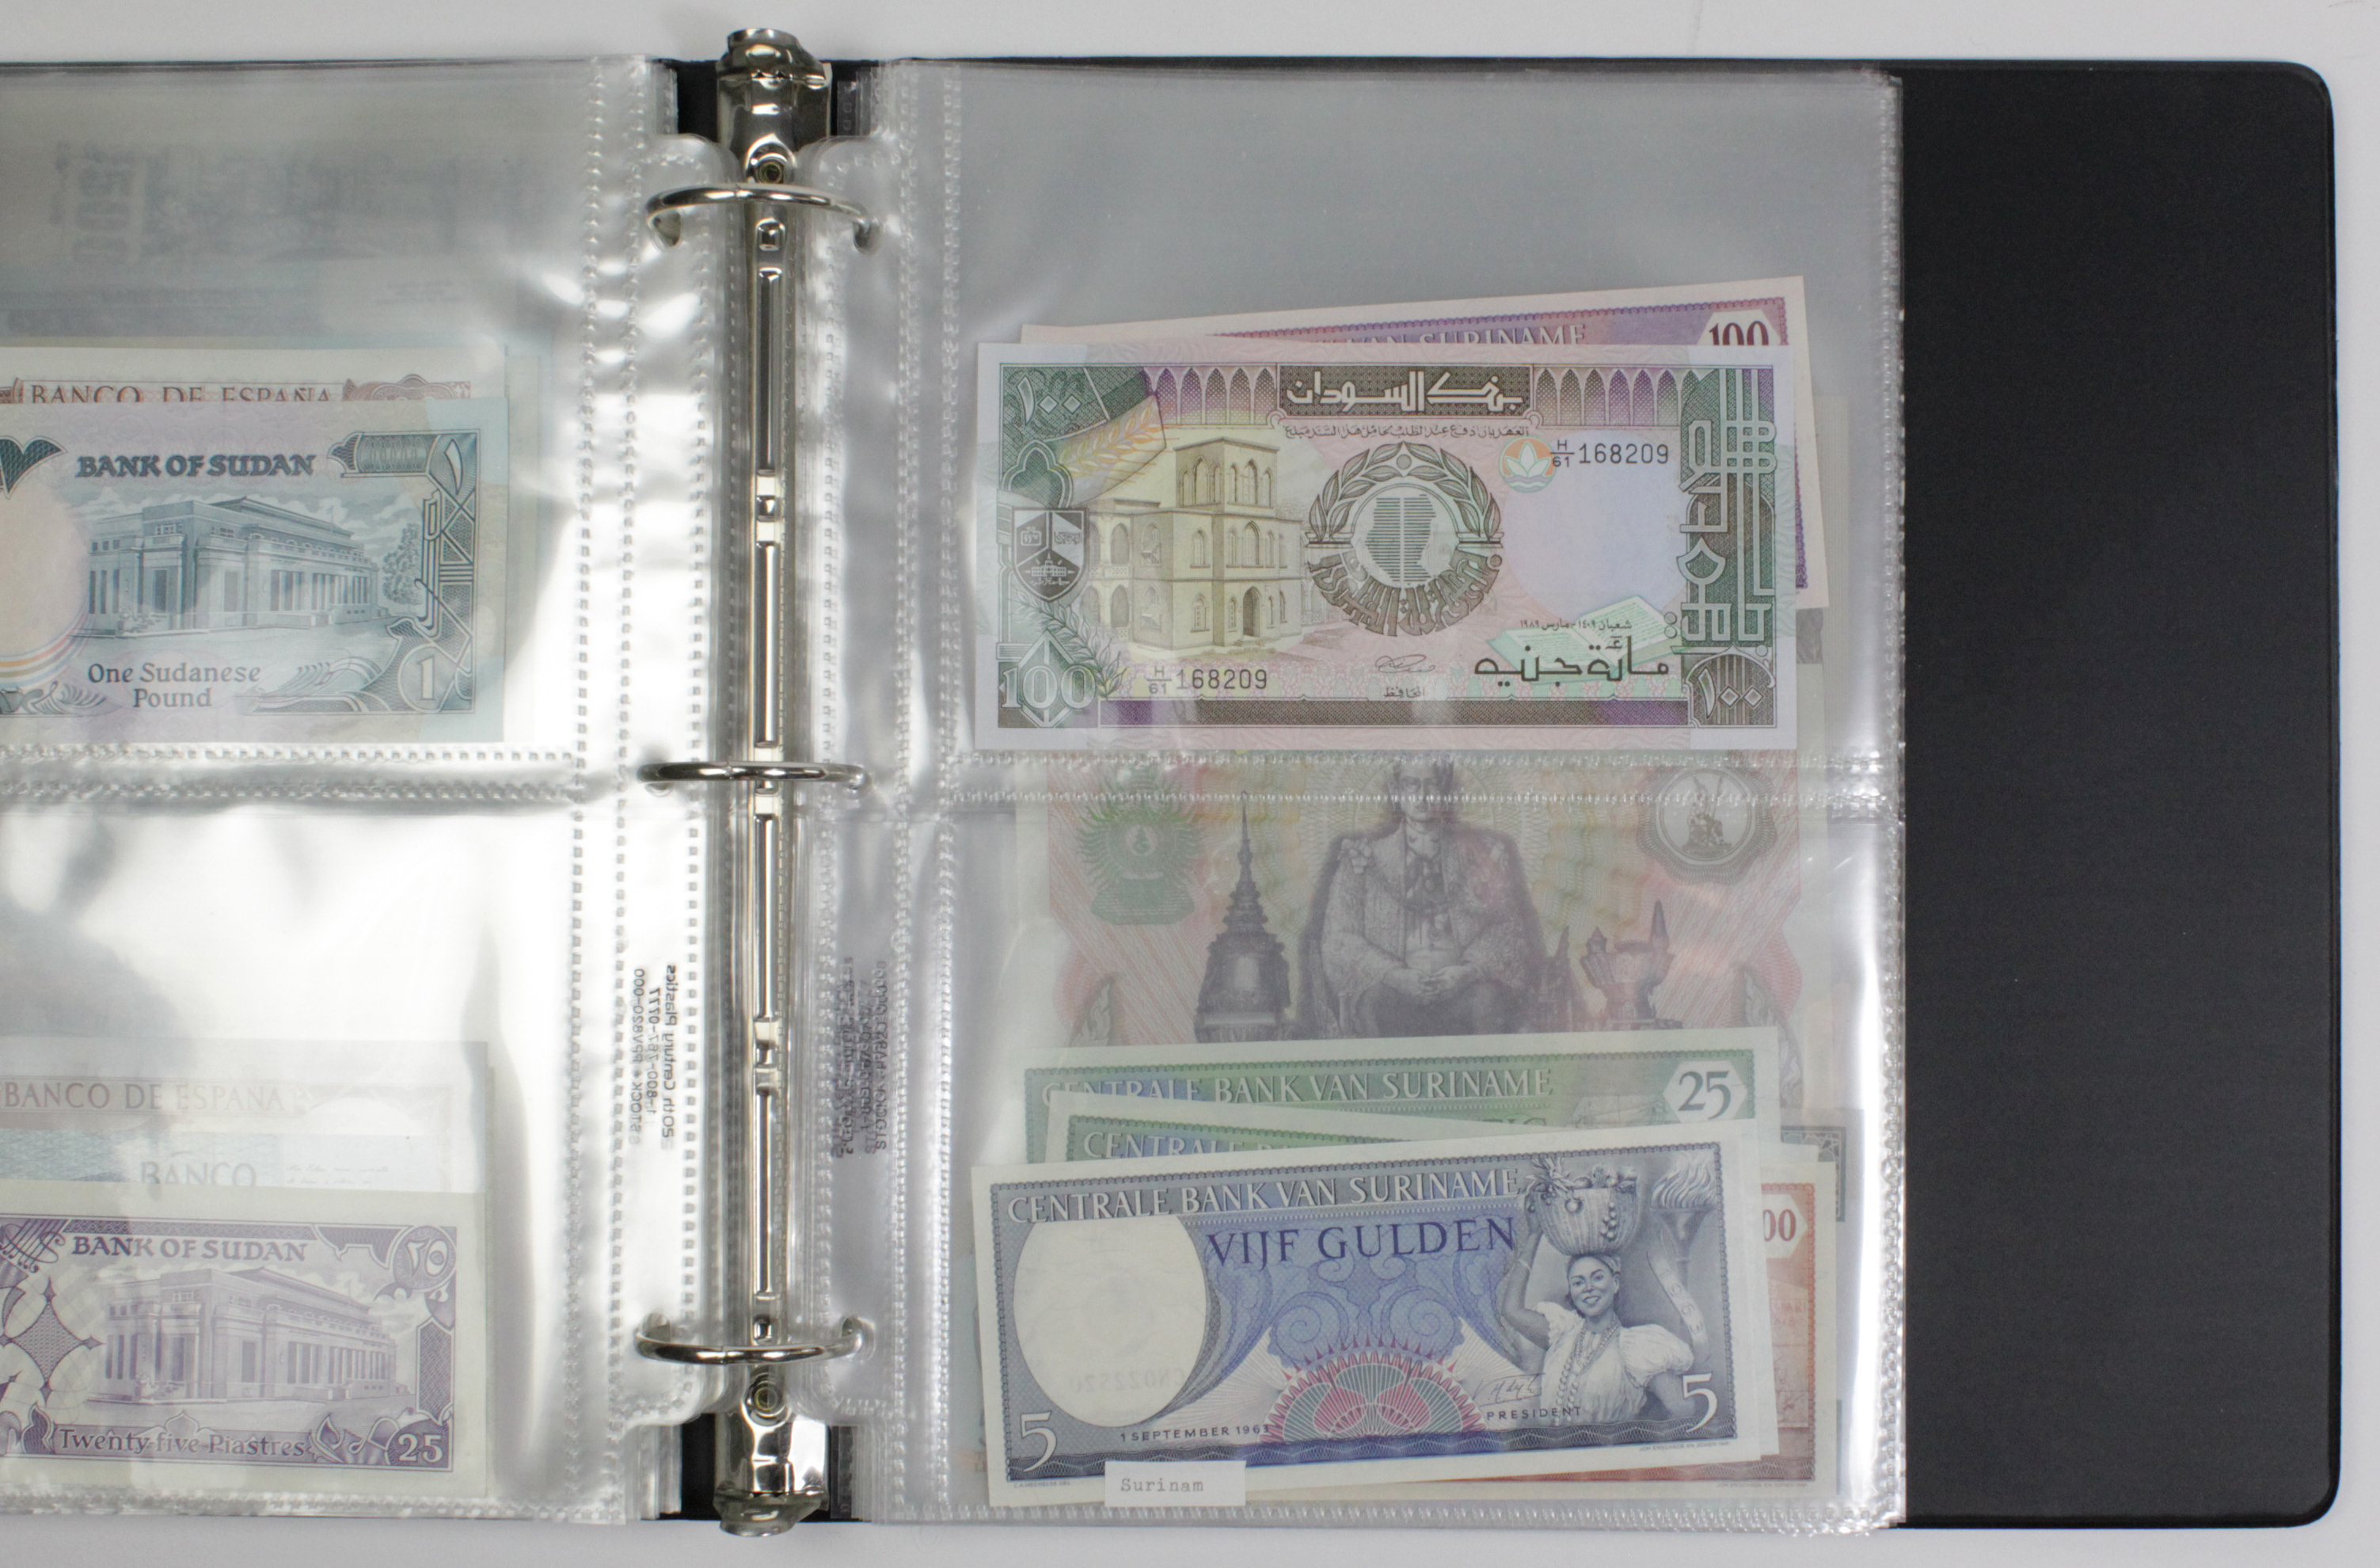 World notes (136) in an album including Burma, Netherlands, Norway, Muscat & Oman, Qatar, Saudi - Image 2 of 4